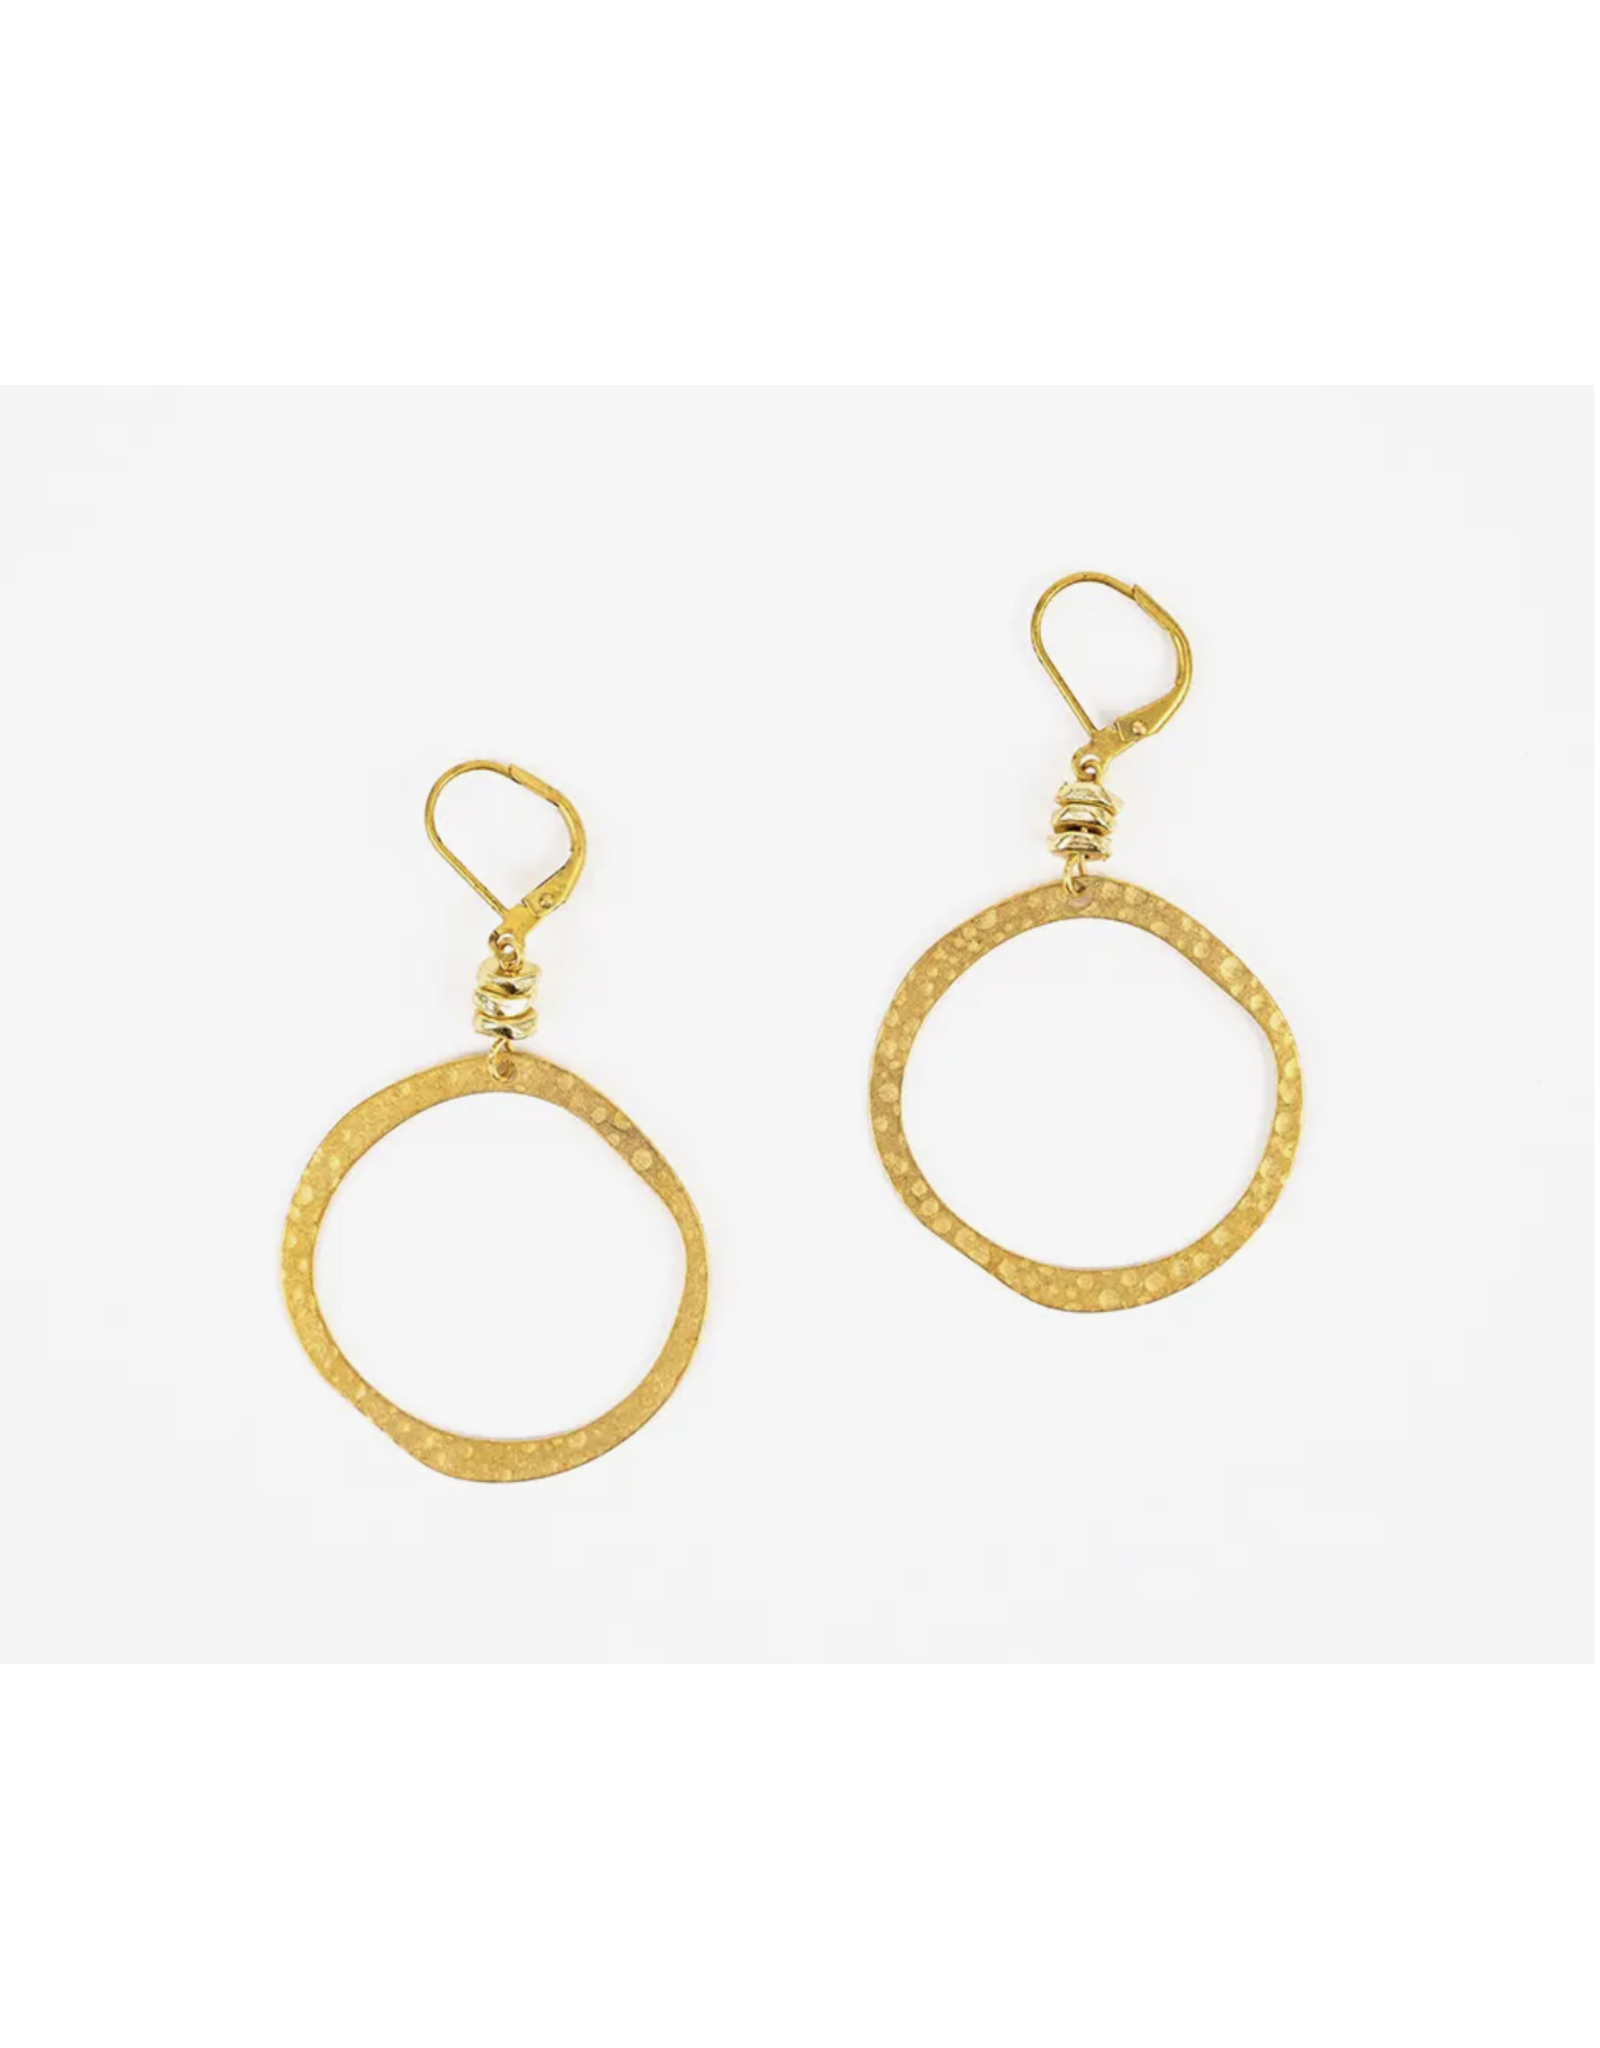 Trade roots Hammered Brass Circle Earrings, Guatemala